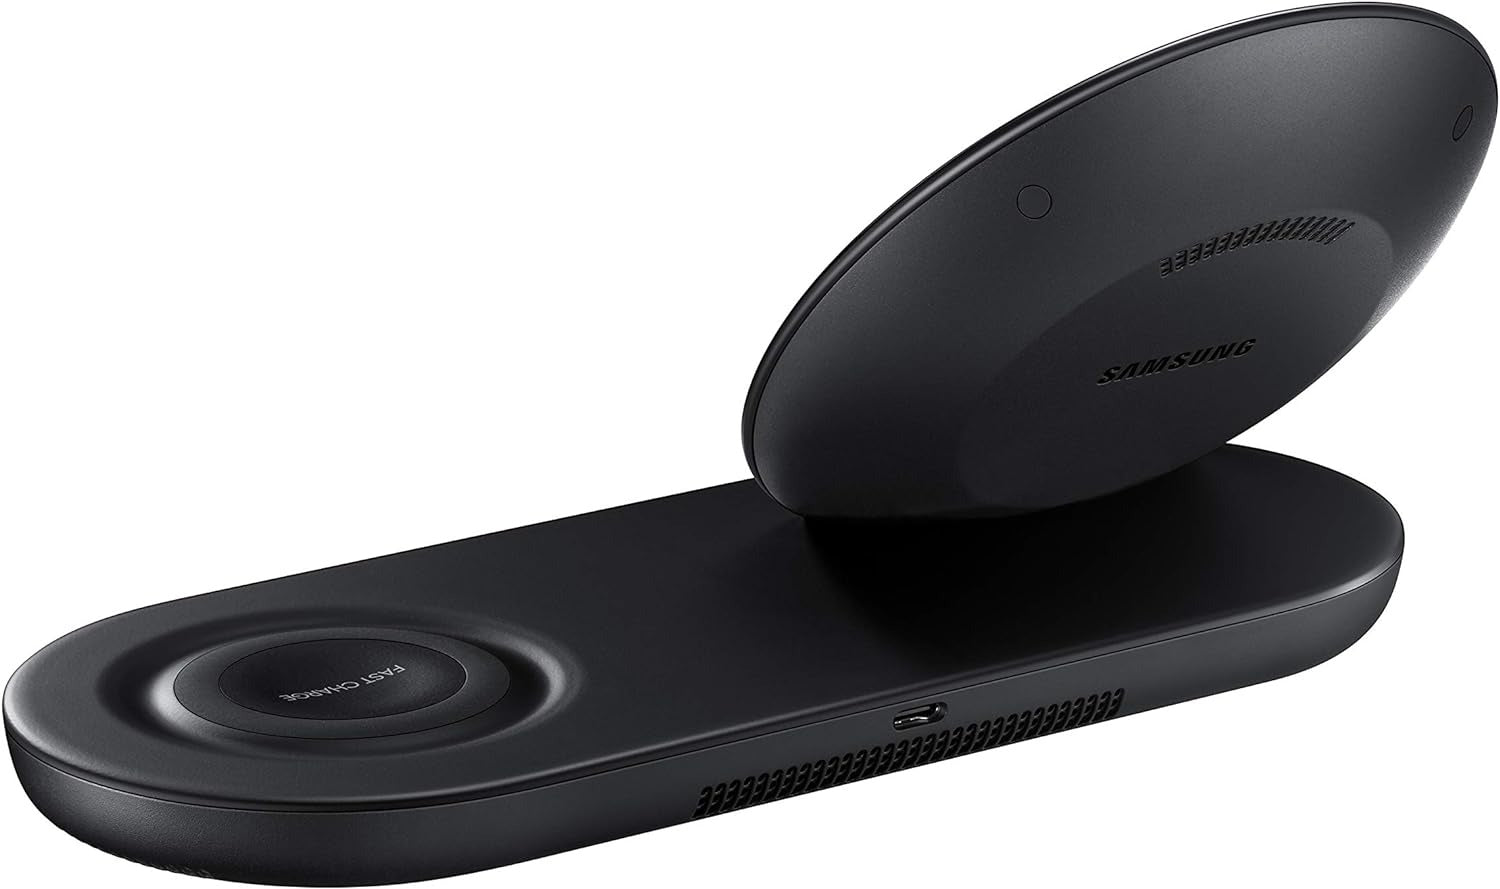 Samsung Wireless Charger DUO Fast Charge Stand &amp; Pad - Black (Pre-Owned)